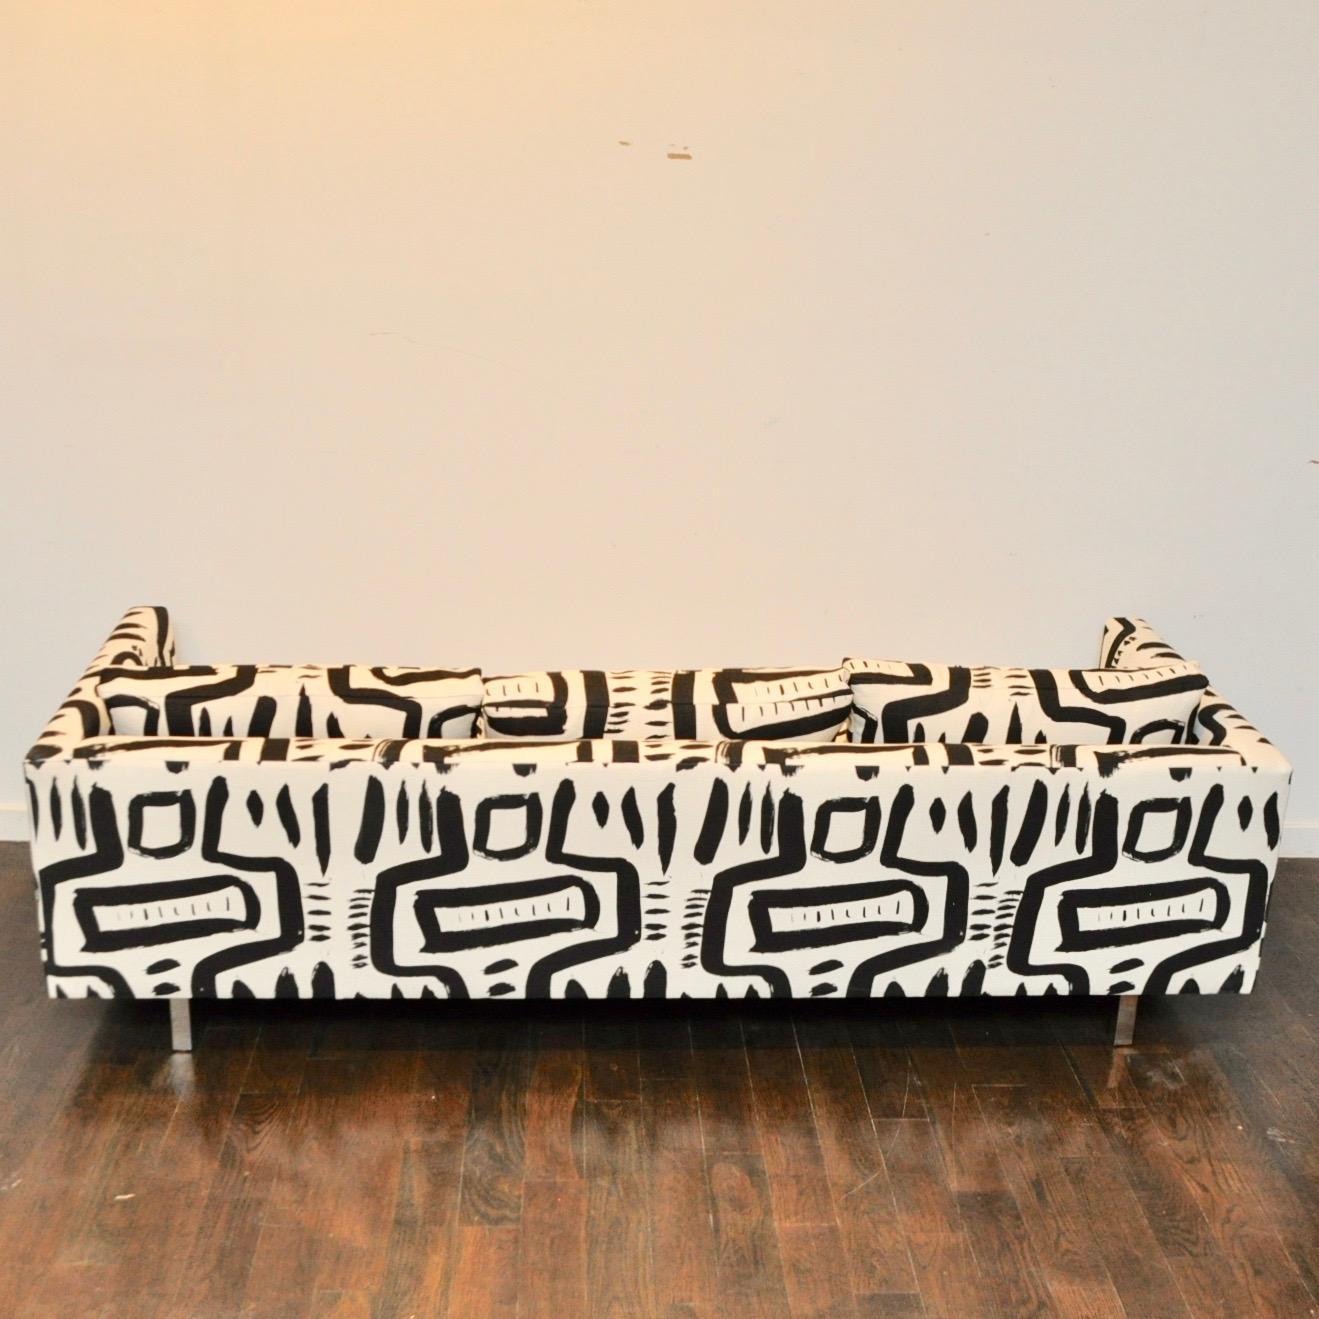 Tuxedo sofa in the manner of Harvey Probber. Newly reupholstered in custom fabric designed by New York designer Patrick Mele. This is not only a comfortable sofa, but a piece of art as well.